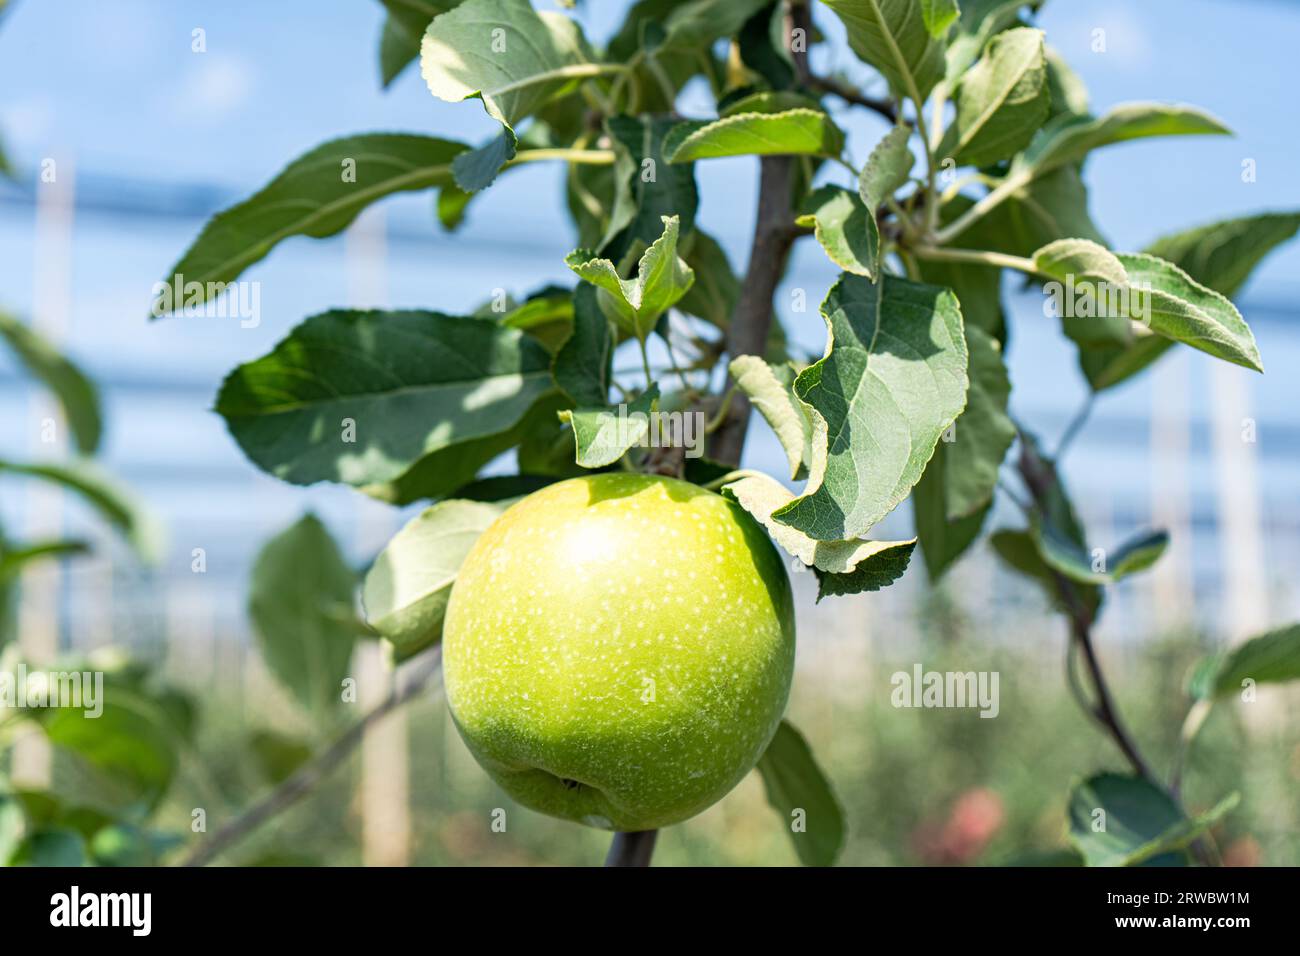 Granny Smith apple variety in the orchard ready to be harvested against blurred background Stock Photo